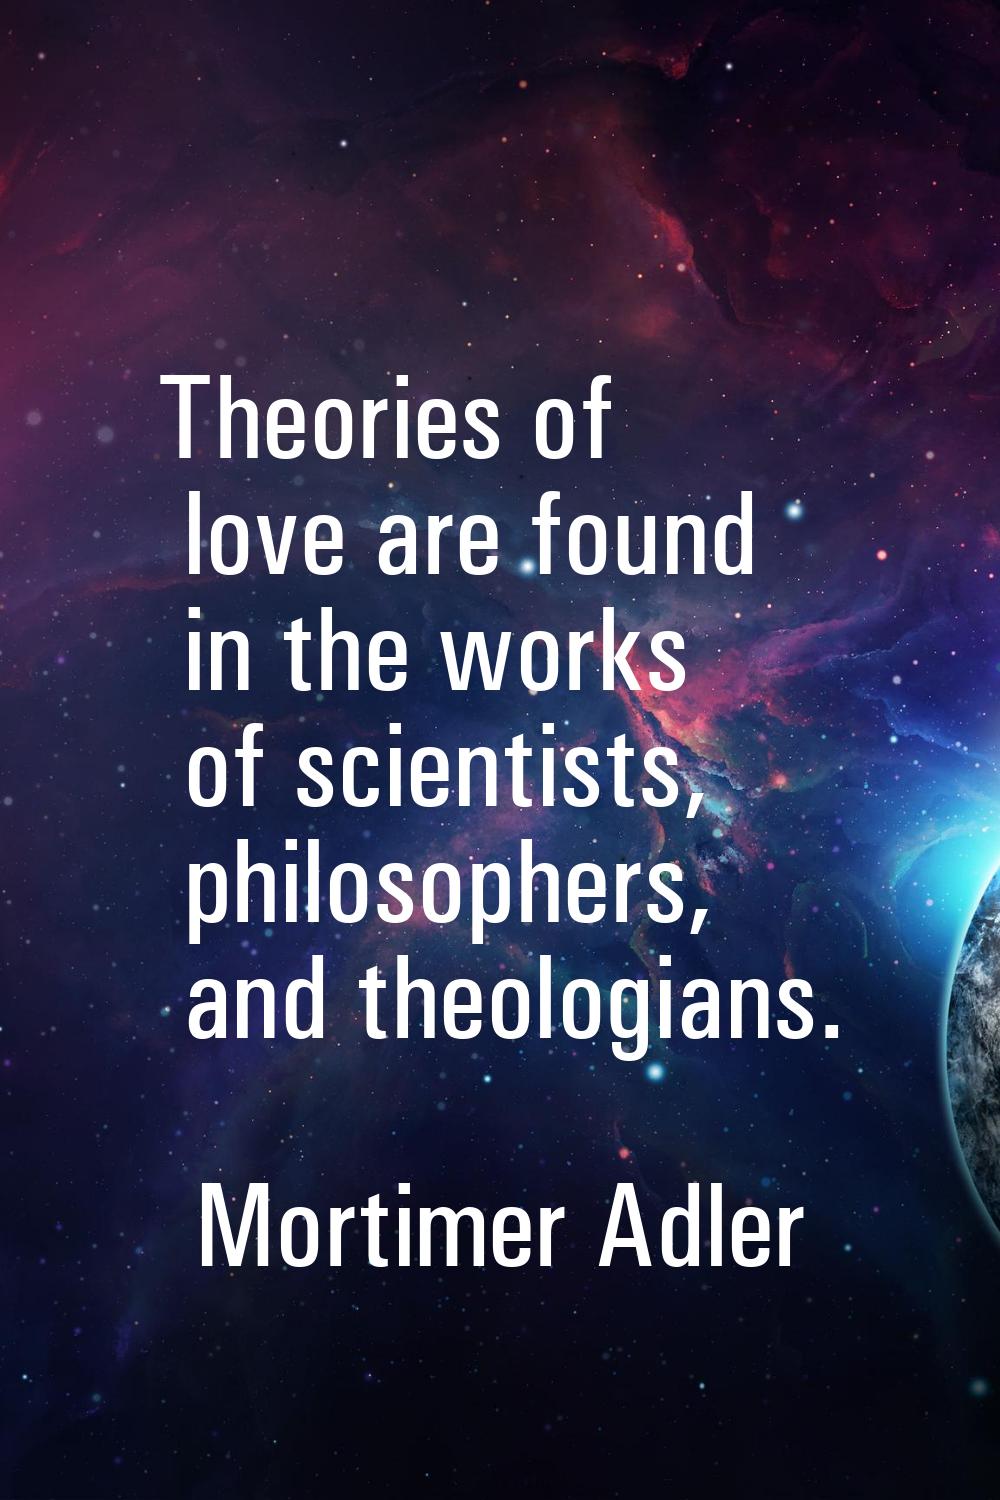 Theories of love are found in the works of scientists, philosophers, and theologians.